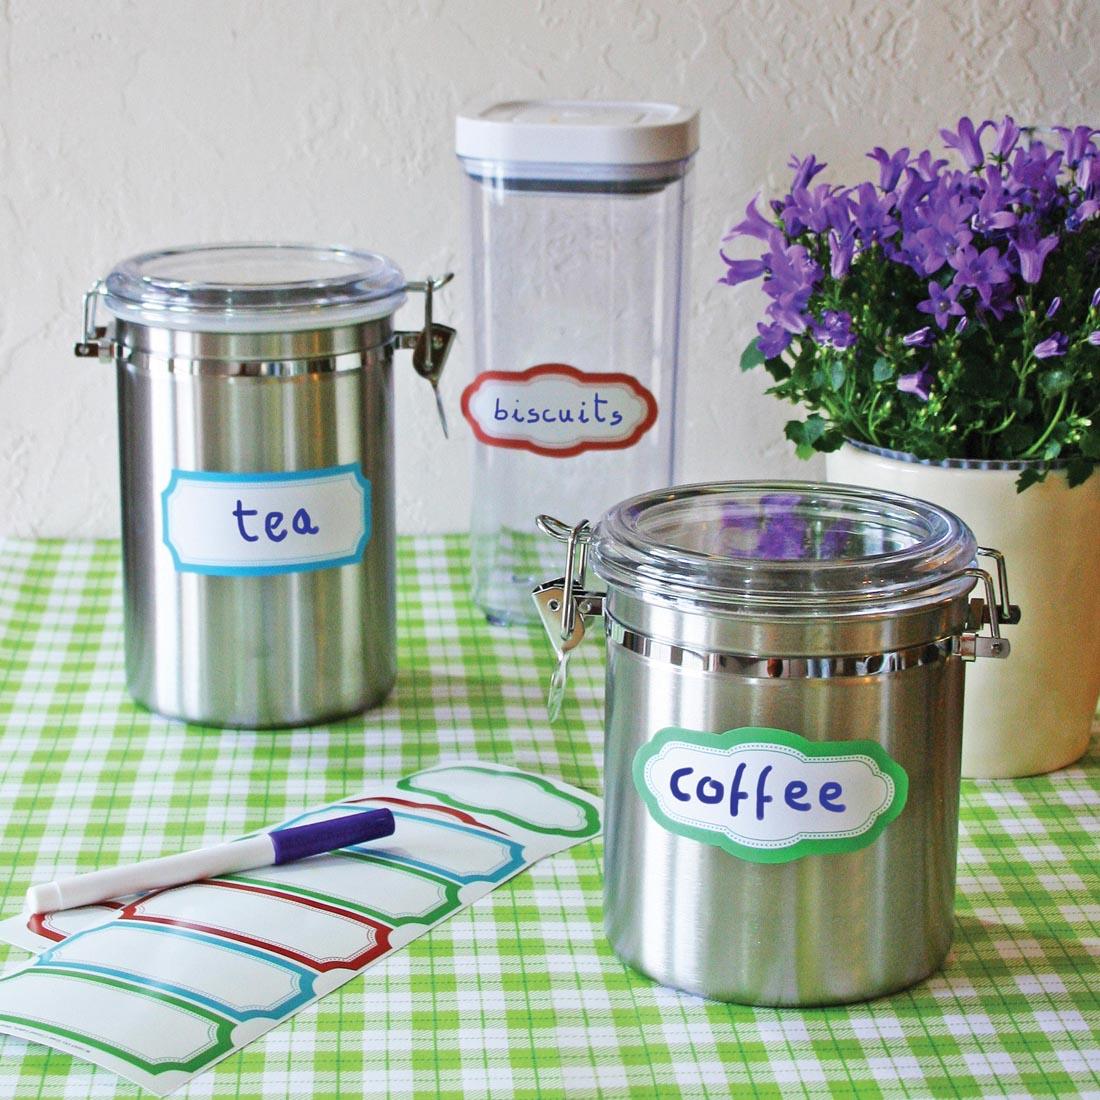 Wallies Dry Erase Colored Labels, shown on 3 jars with contents labeled